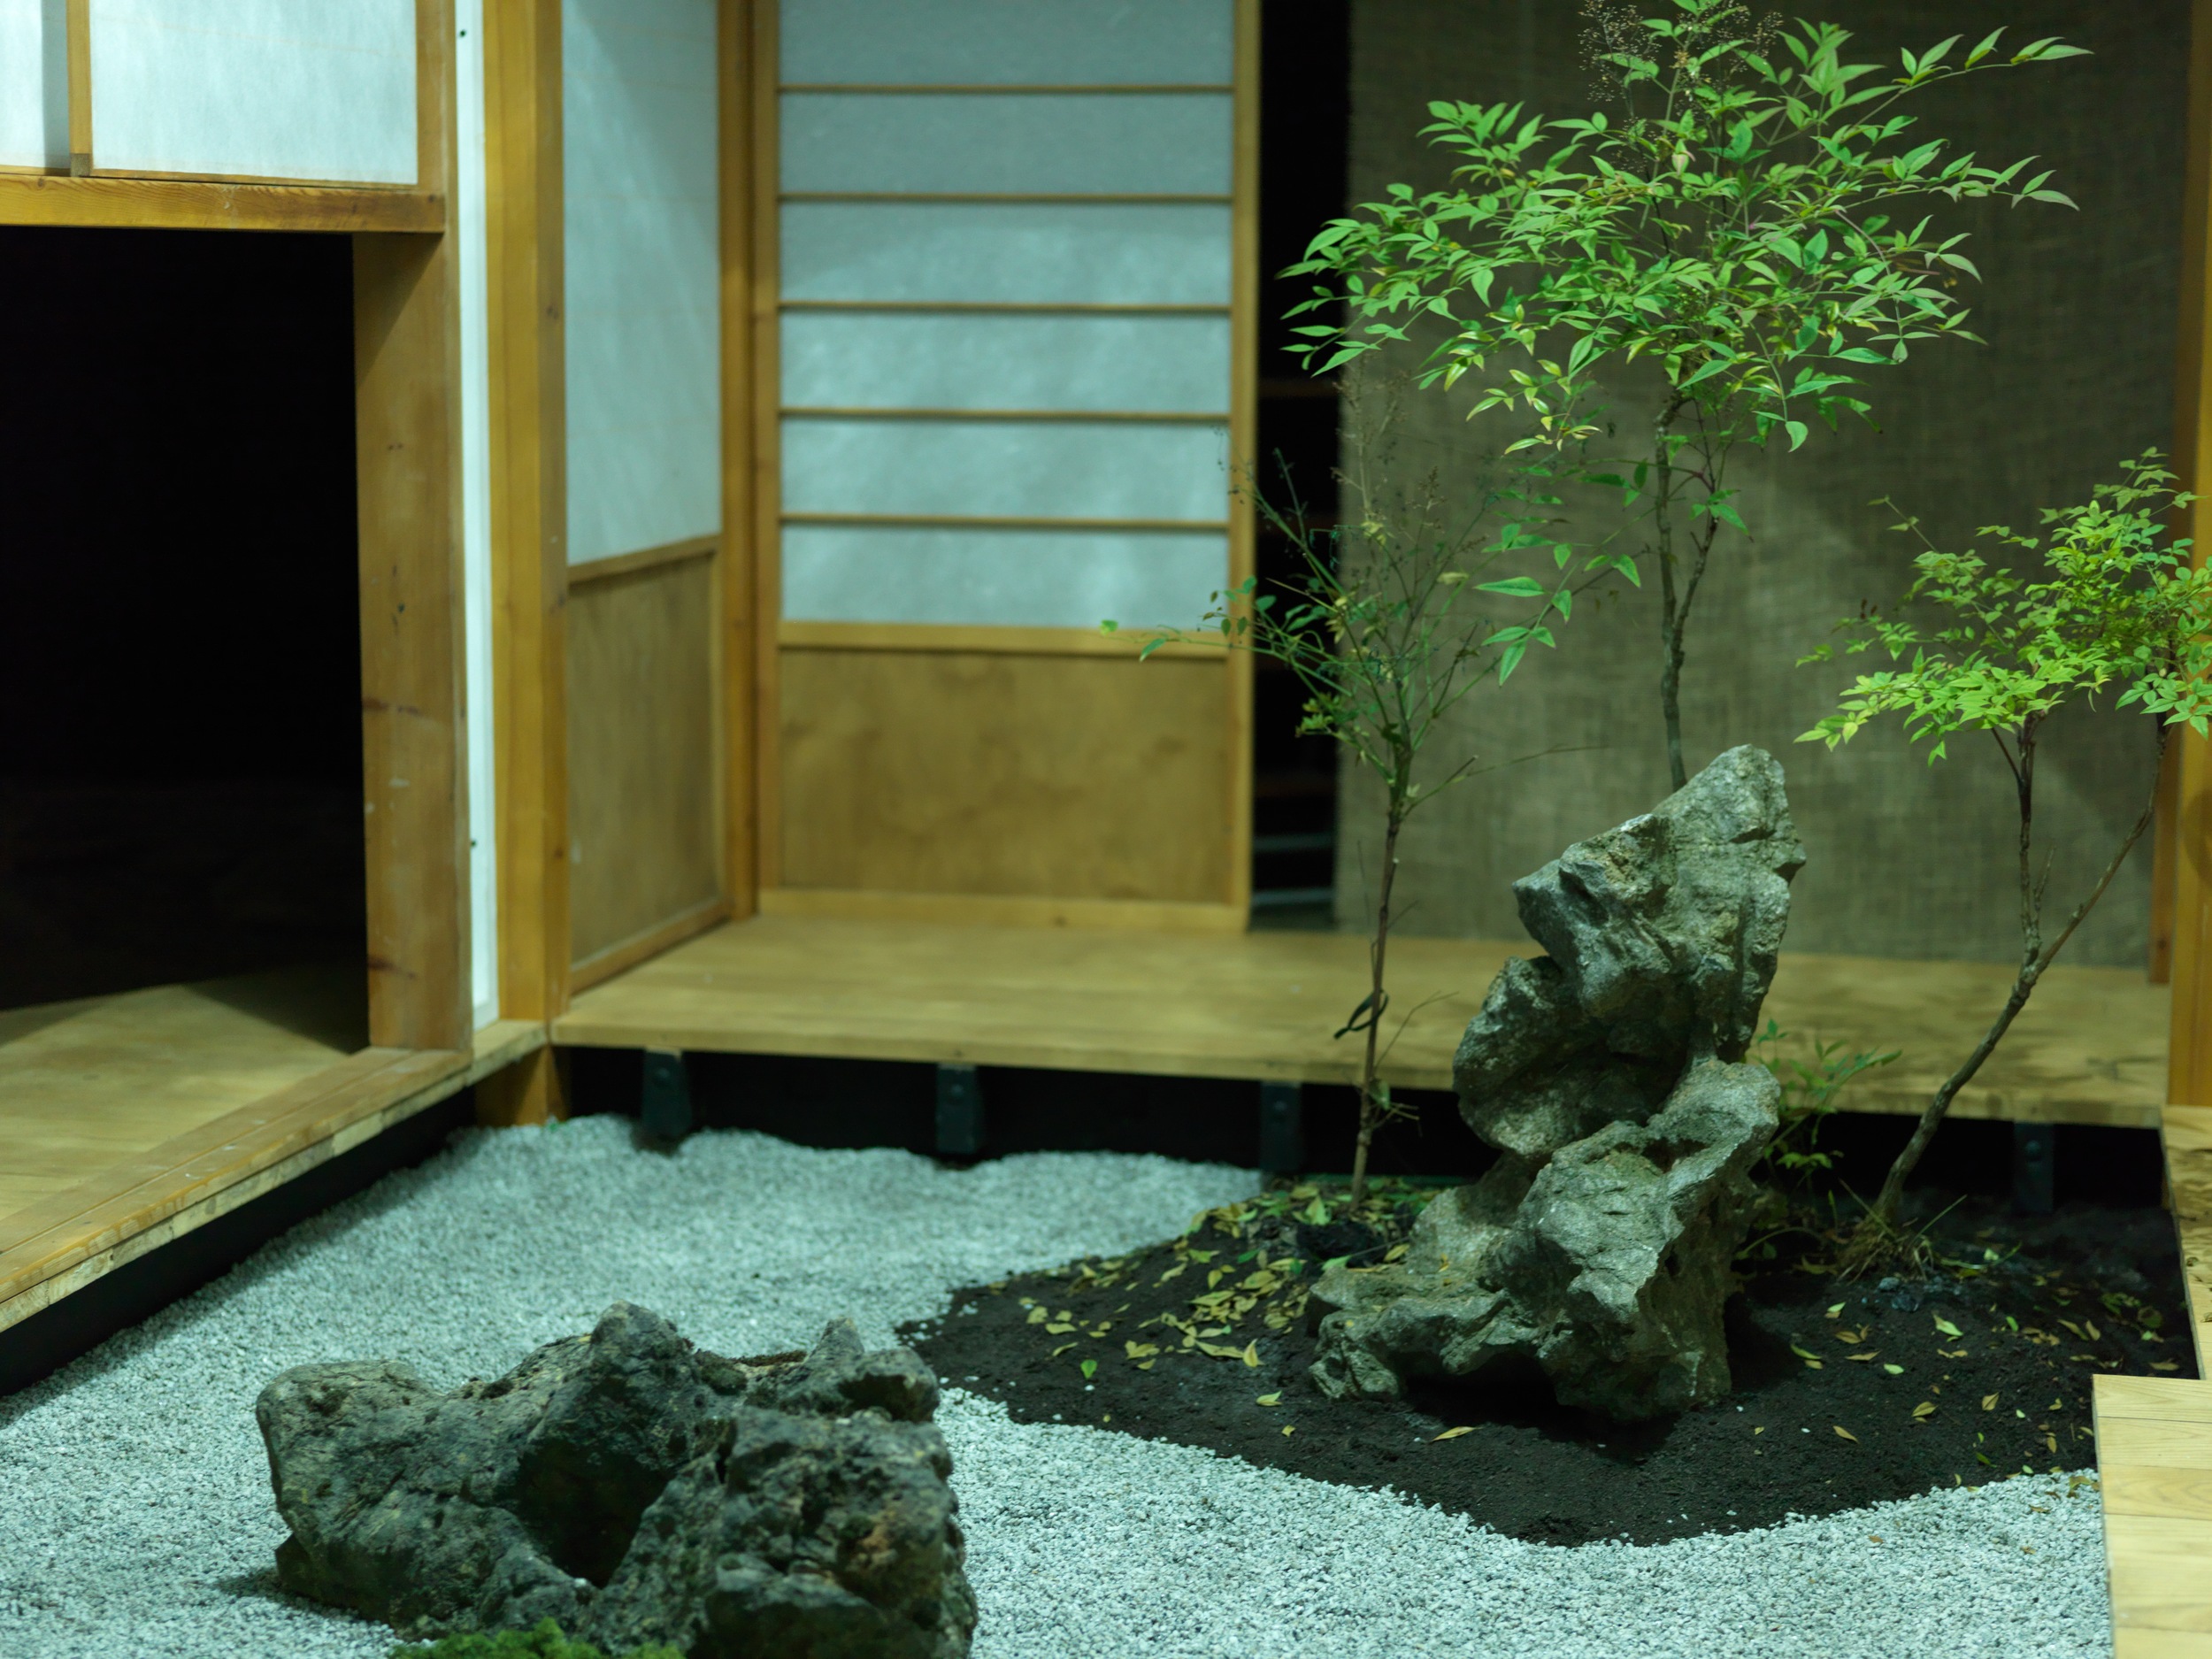 Close up view of the Japanese tea house & interior garden